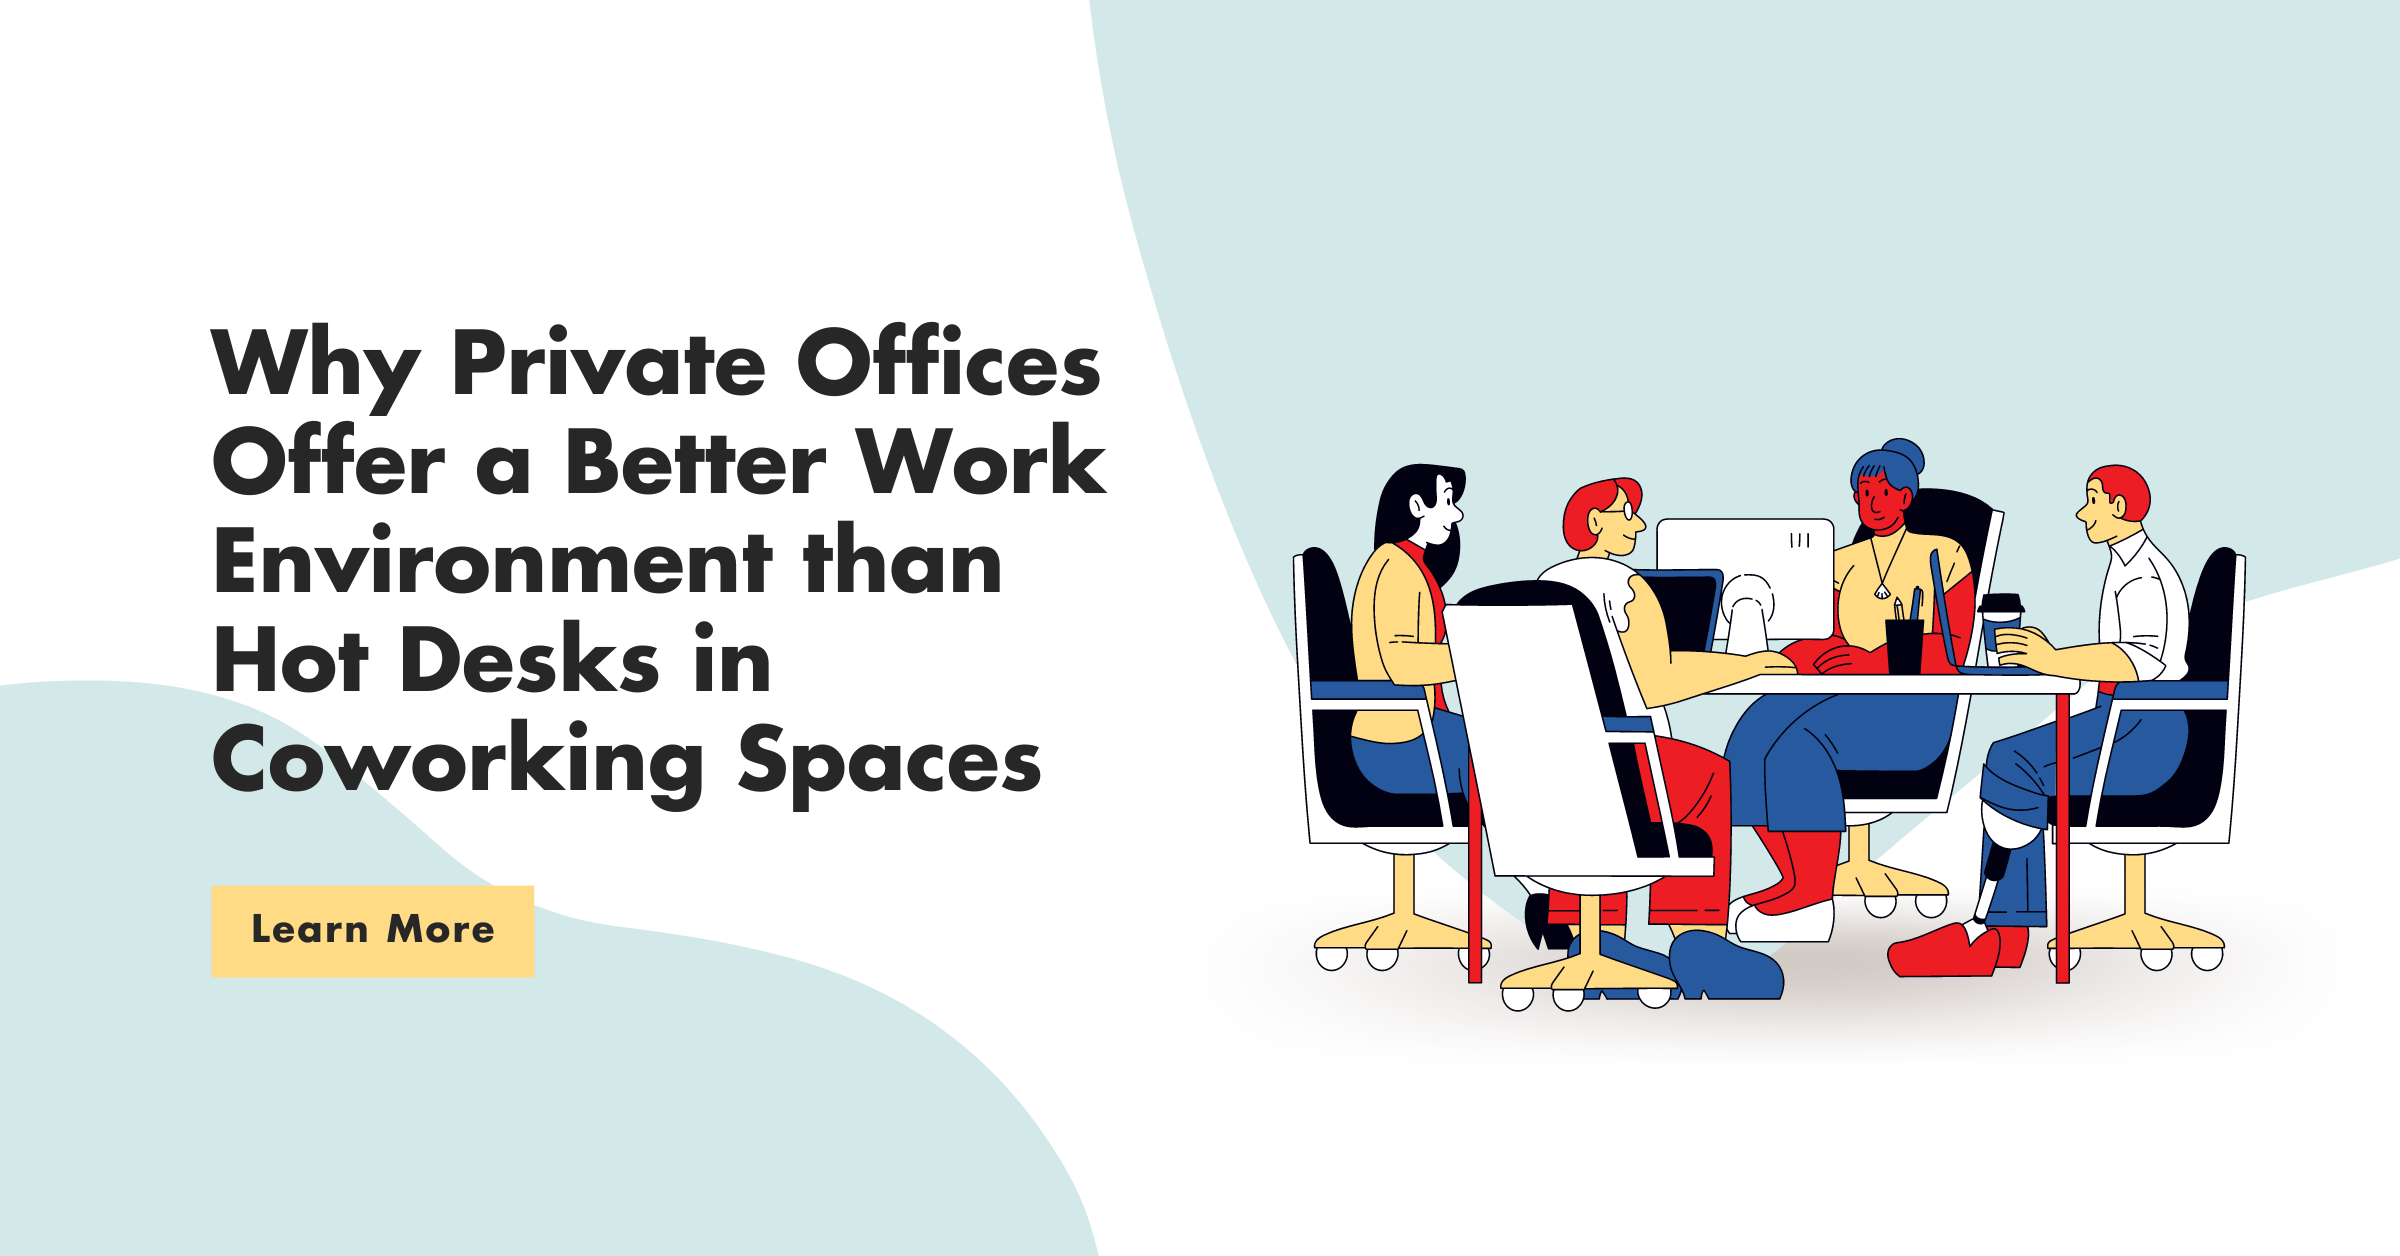 Mar2023_Why Private Offices Offer a Better Work Environment than Hot Desks in Coworking Spaces